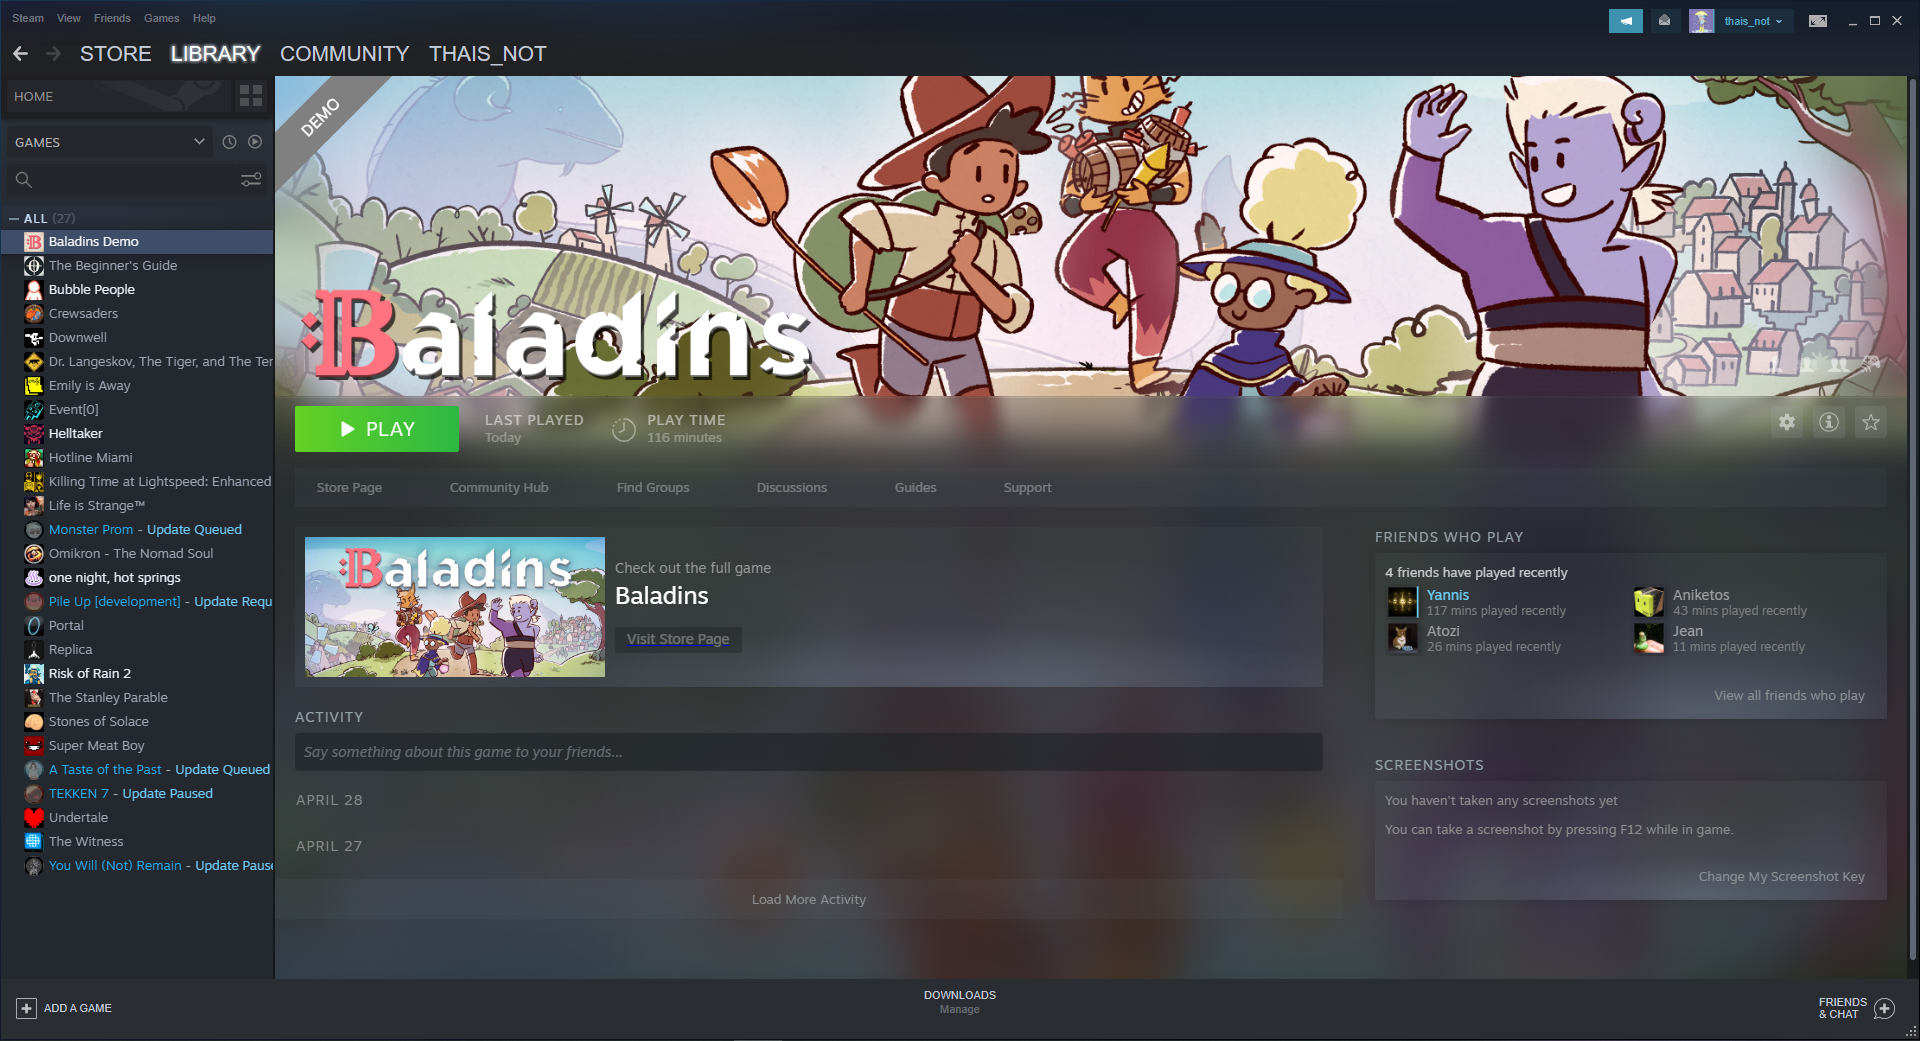 Baladins - How to Play With Friends Using Steam Remote - 1. LAUNCH THE GAME - 5A91896